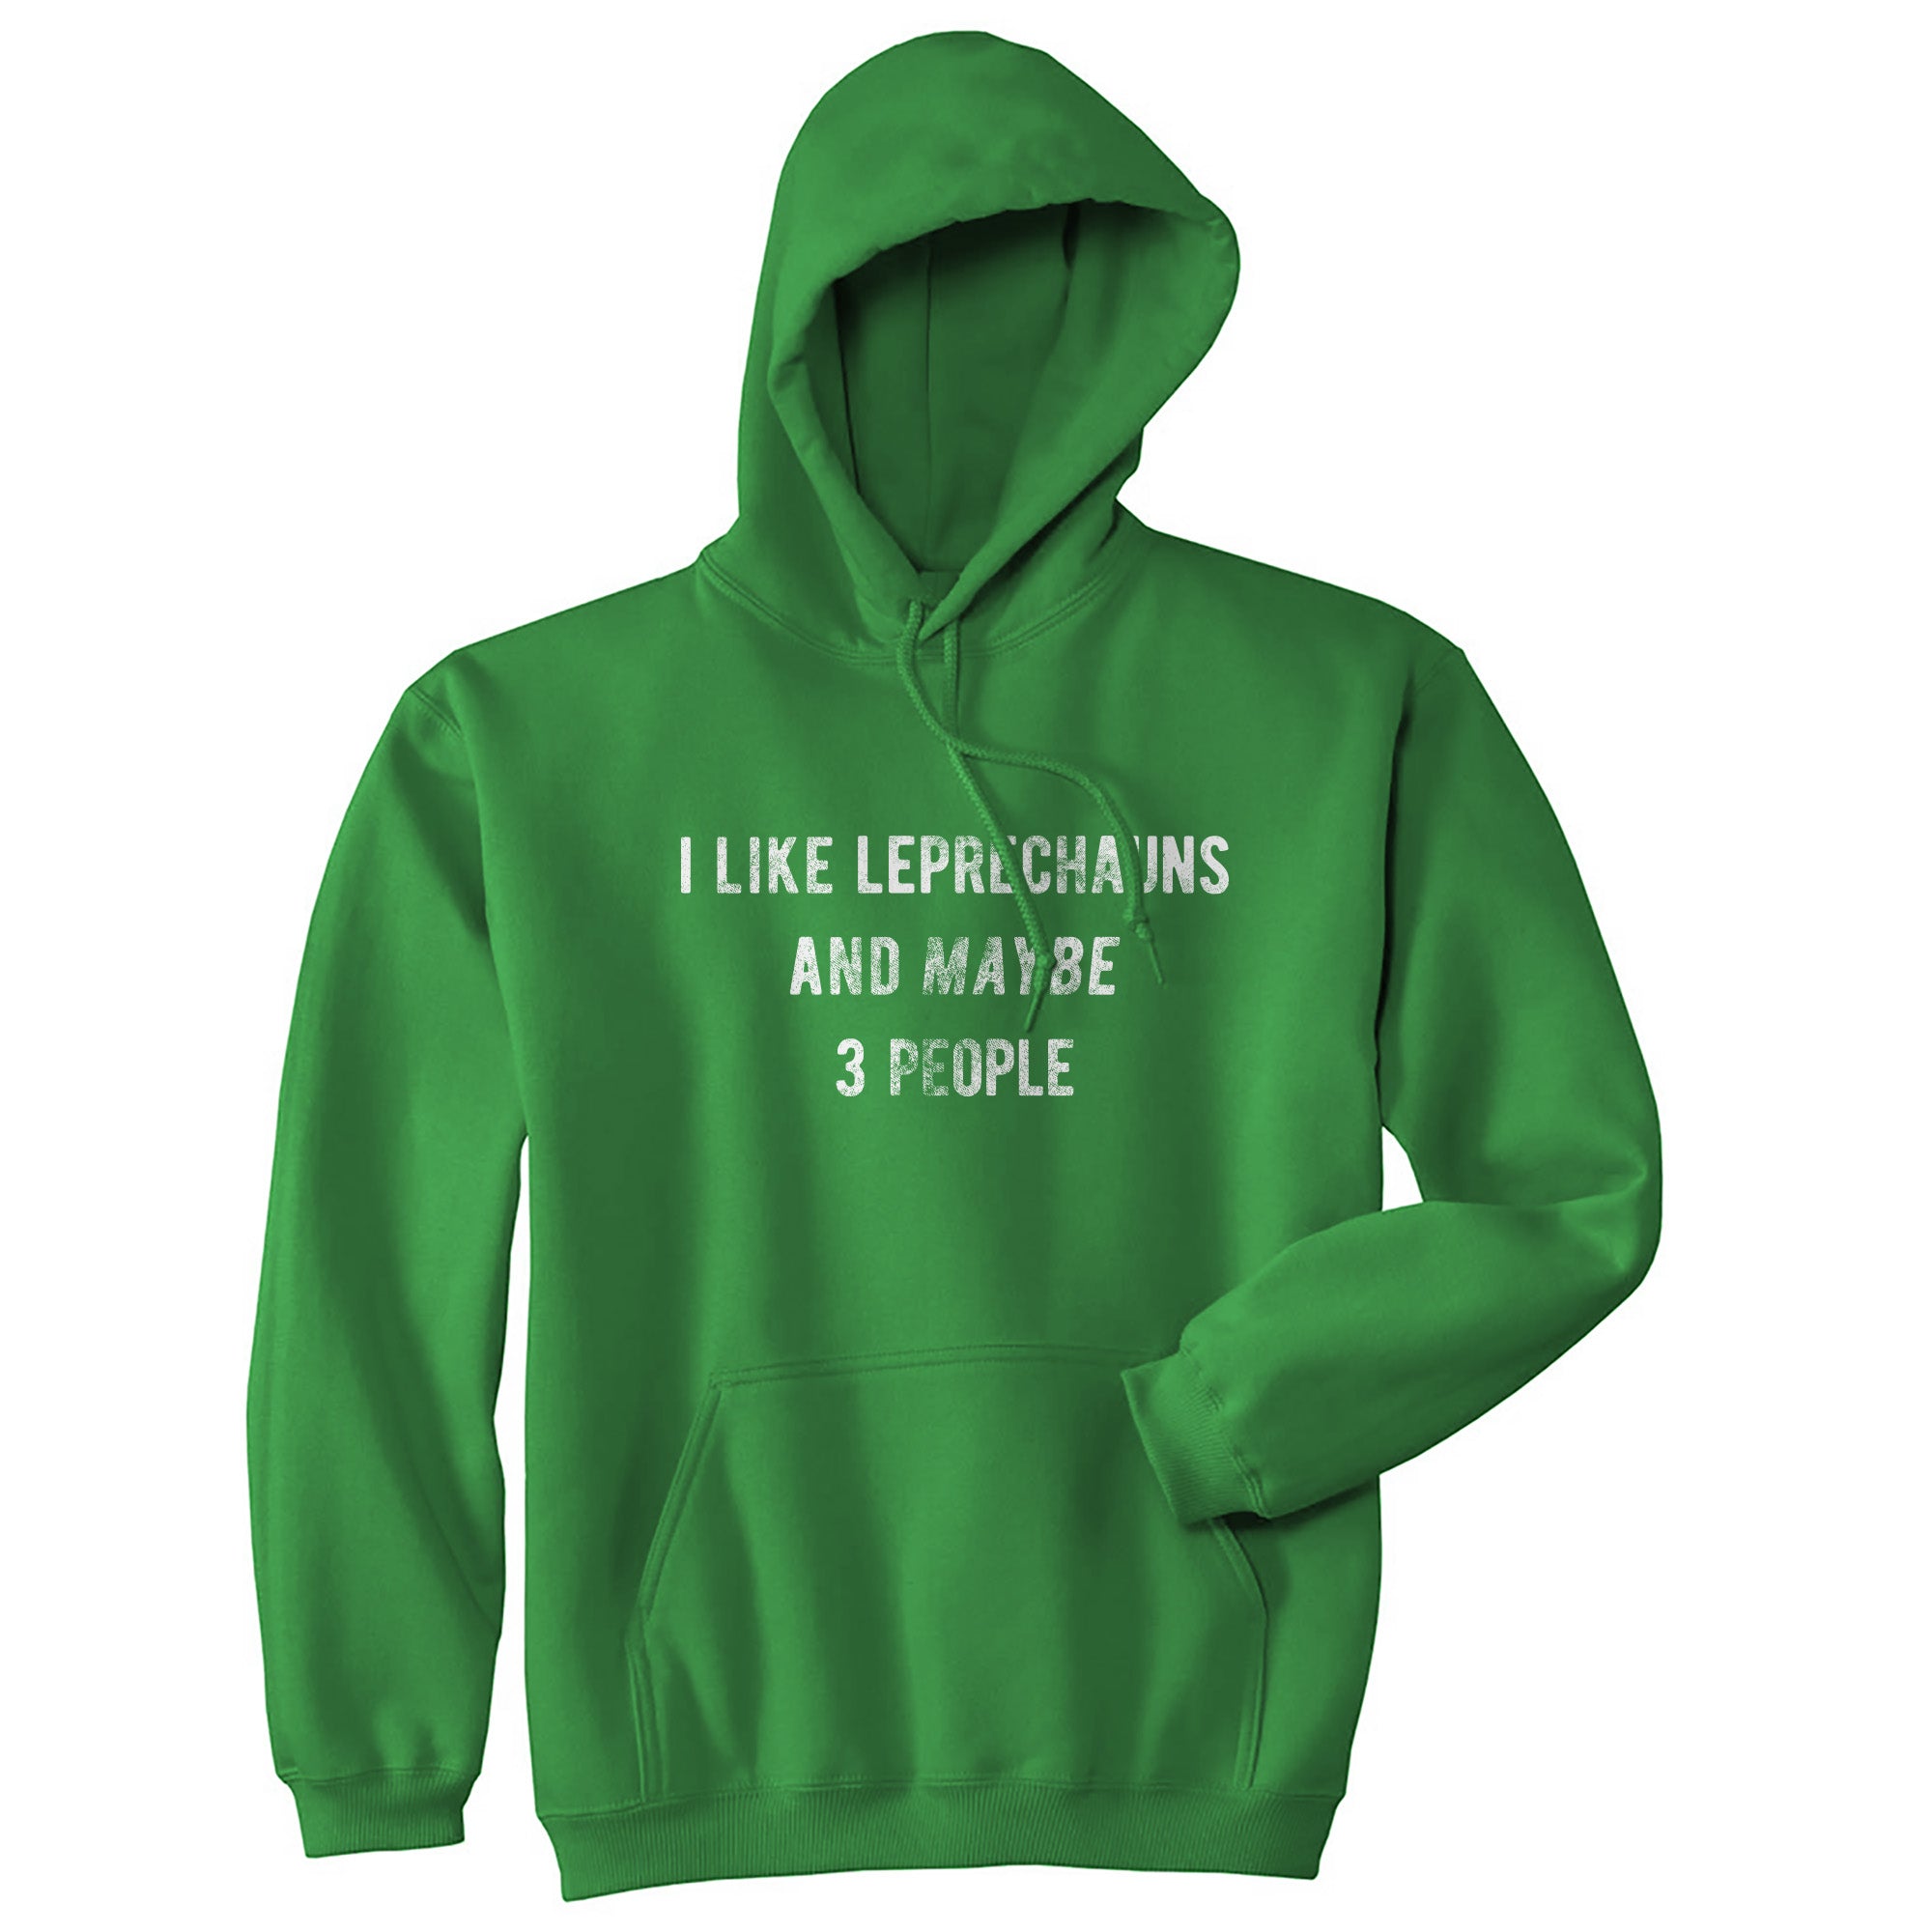 Funny Green I Like Leprechauns And Maybe 3 People Hoodie Nerdy Saint Patrick's Day Introvert Tee